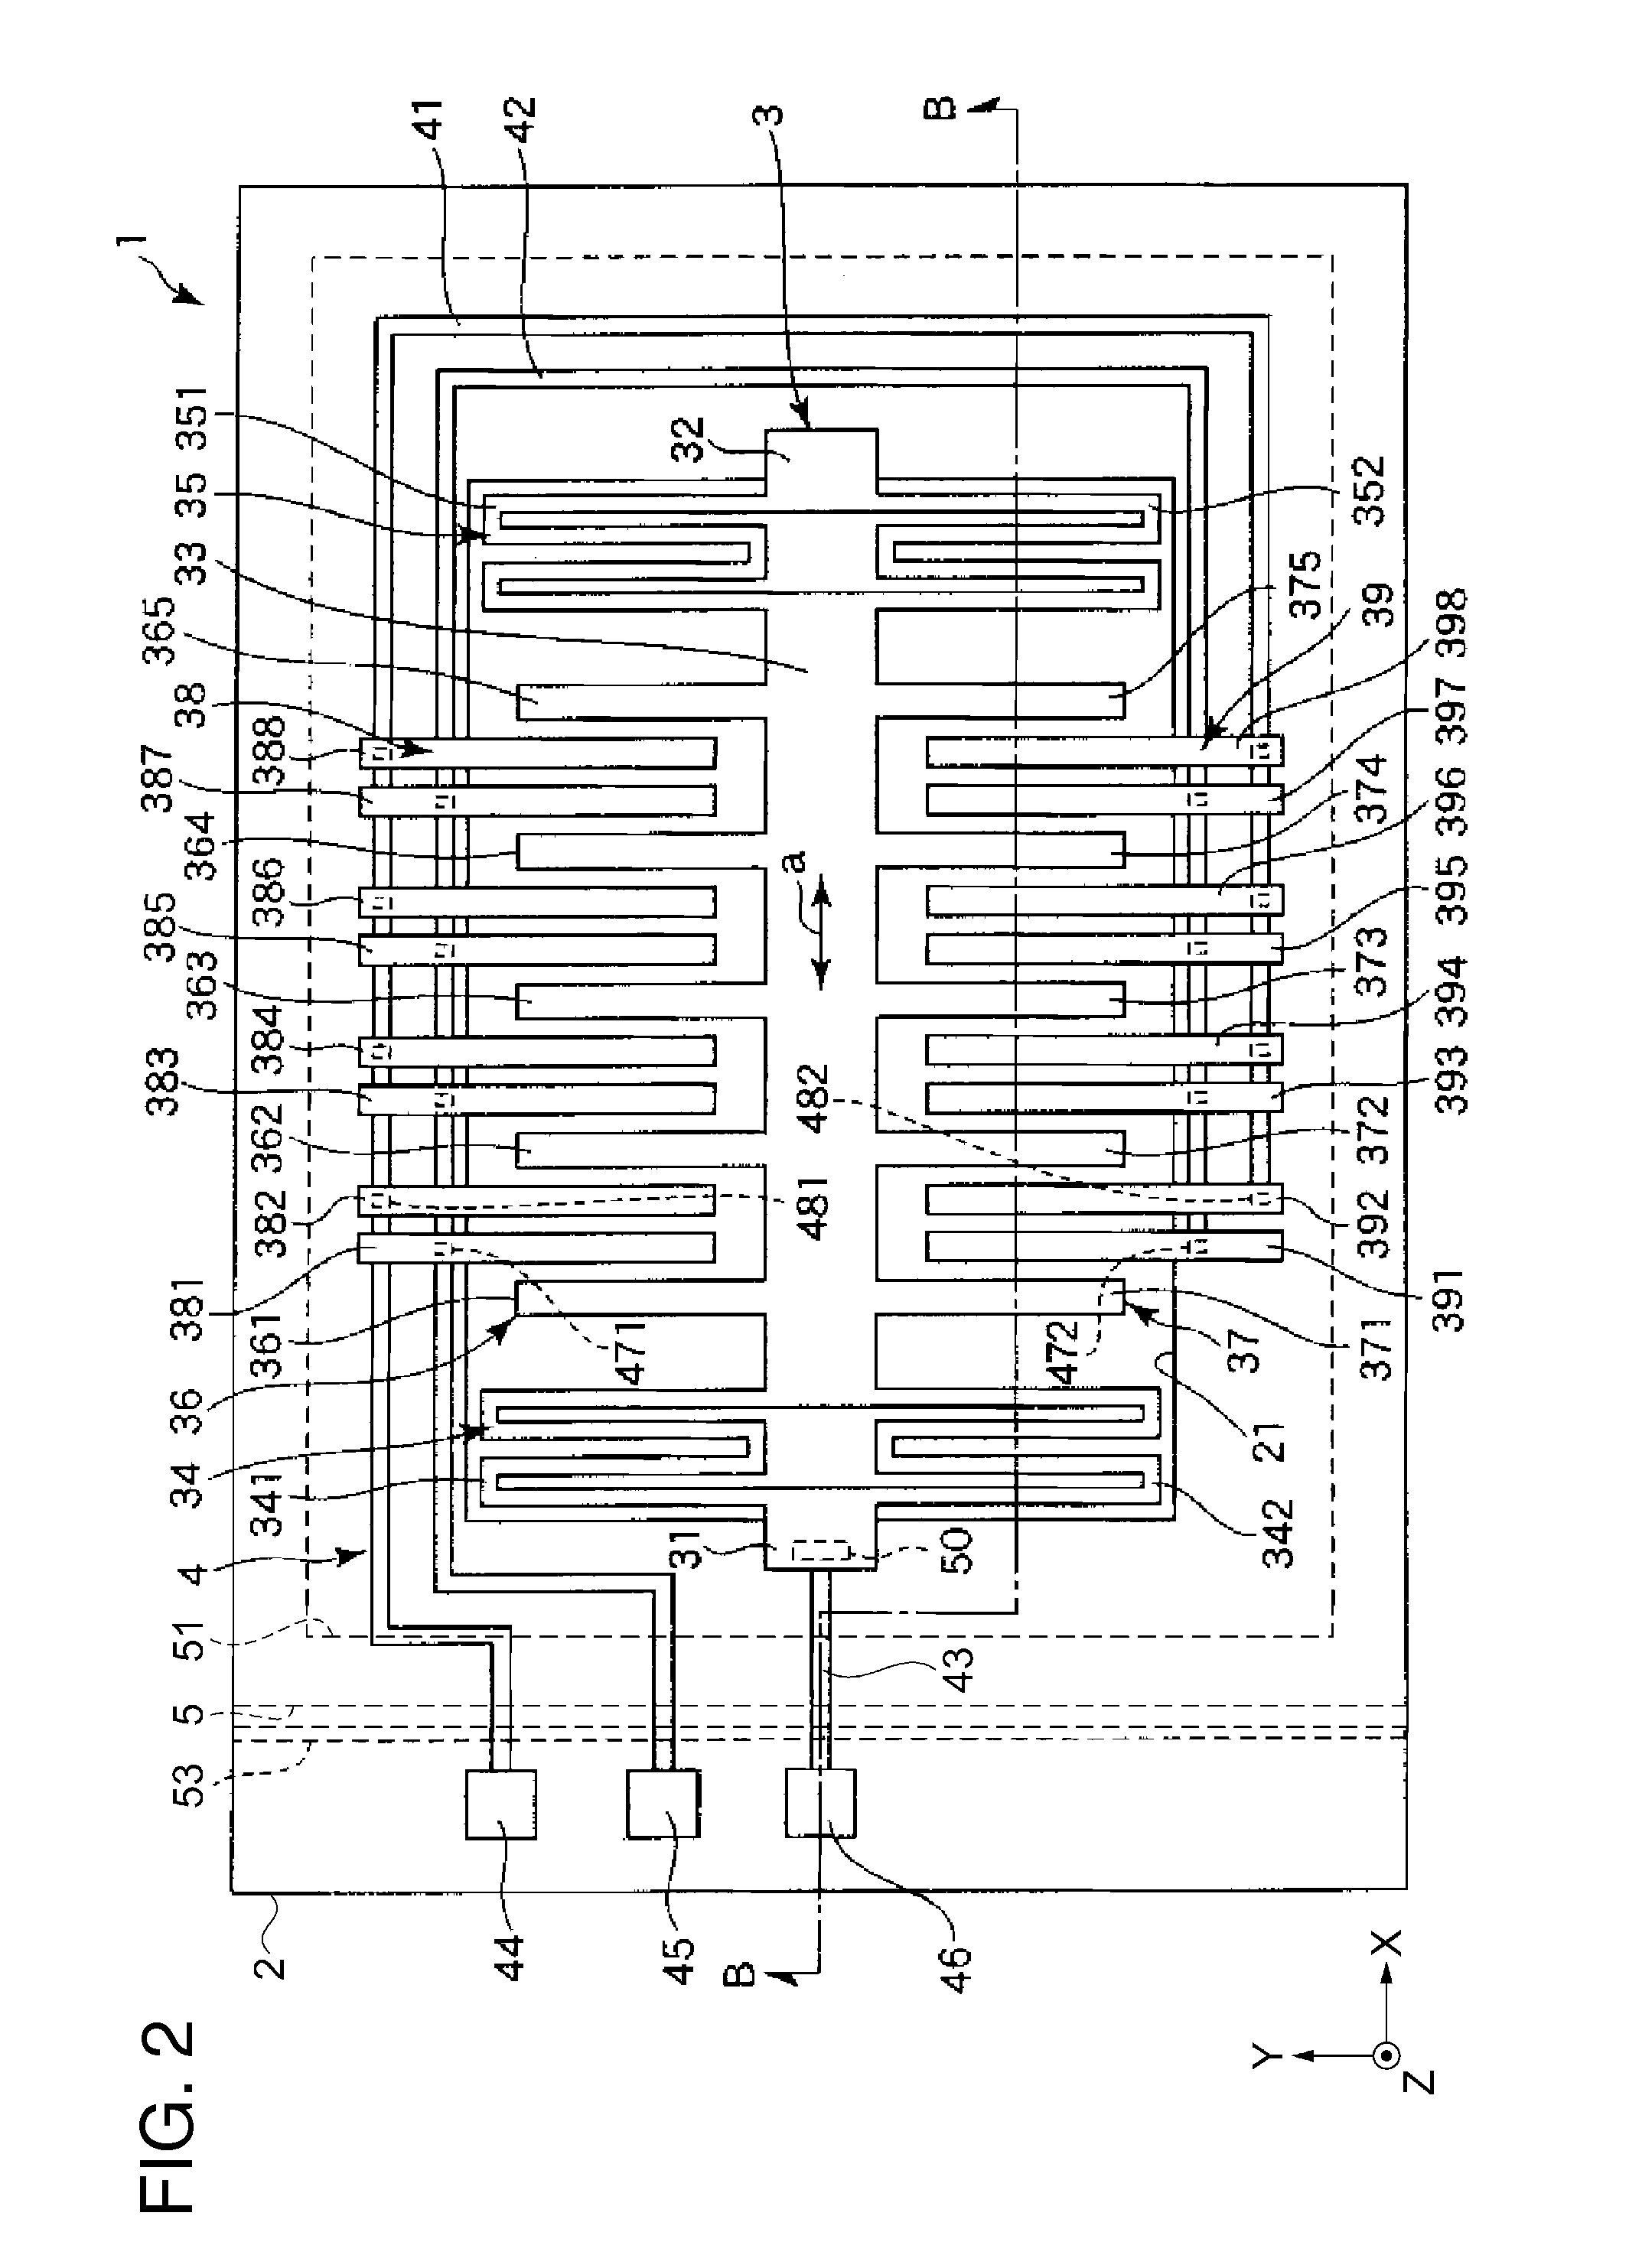 Module, electronic apparatus, moving object, and method of manufacturing module